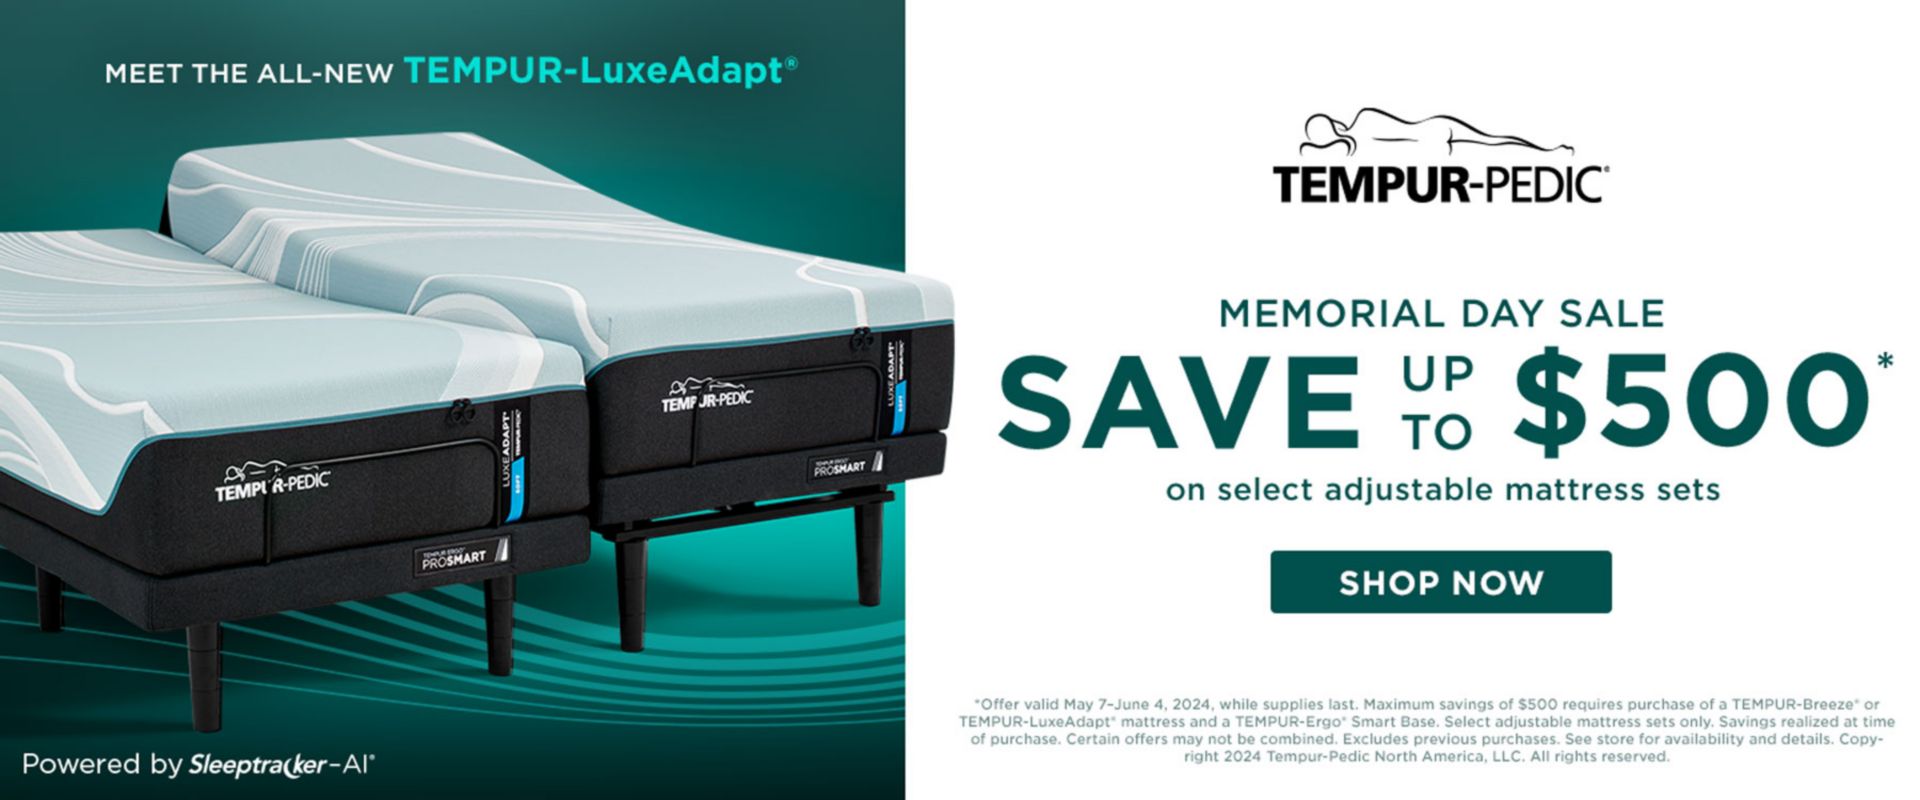 Meet the All-New Tempur-LuxeAdapt. Powered by Sleeptraker-AI. Tempur-Pedic Memorial Day Sale. Save up to $500 on Select Adjustable Mattress Sets. Shop Now. *Offer valid May 7–June 4, 2024, while supplies last. Maximum savings of $500 requires purchase of a TEMPUR-Breeze® or  TEMPUR-LuxeAdapt® mattress and a TEMPUR-Ergo® Smart Base. Select adjustable mattress sets only. Savings realized at time of purchase. Certain offers may not be combined. Excludes previous purchases. See store for availability and details. Copyright 2024 Tempur-Pedic North America, LLC. All rights reserved.